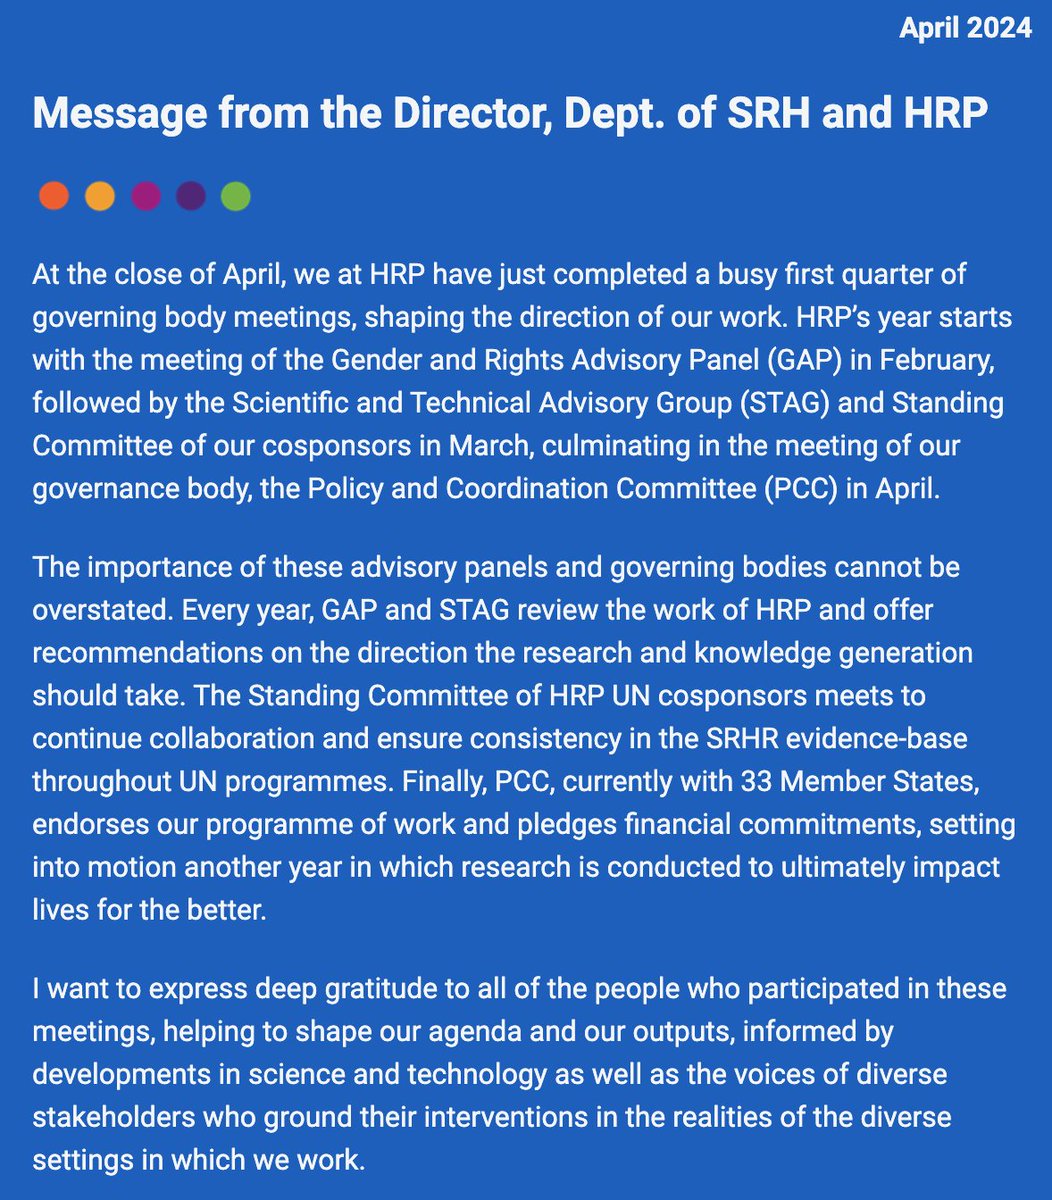 In our latest newsletter, @PascaleAllotey reflects on a busy first quarter of governing meetings and what it means for HRP. Also find highlights of our work that looks at #SRHR from various angles, from AI to #VAW to masculinities: bit.ly/3xYSMWG